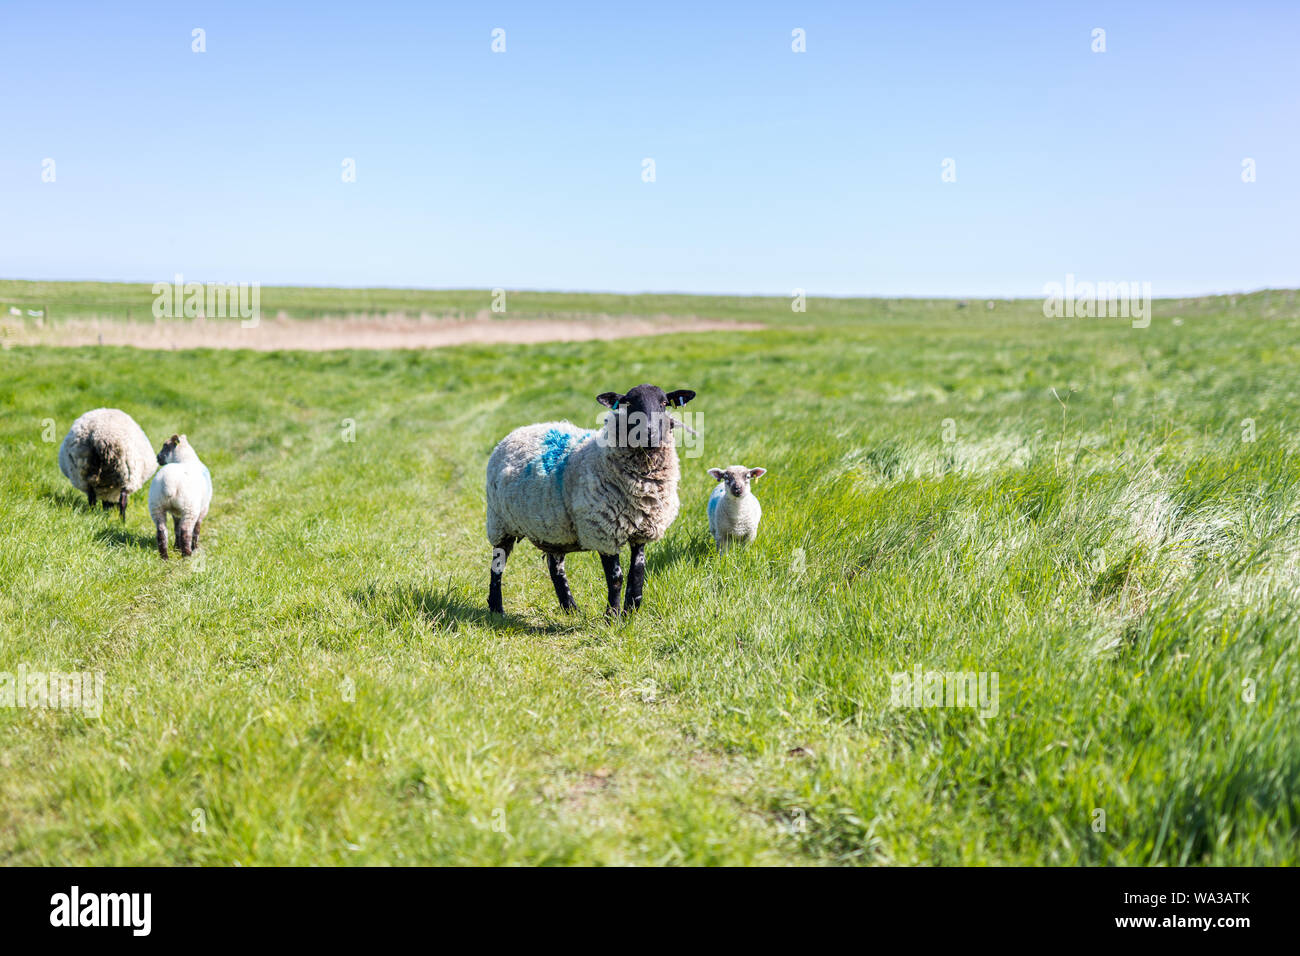 A mother sheep and its baby lamb, they are left to graze and explore naturally. Live stock grazing in Orford, Suffolk Stock Photo